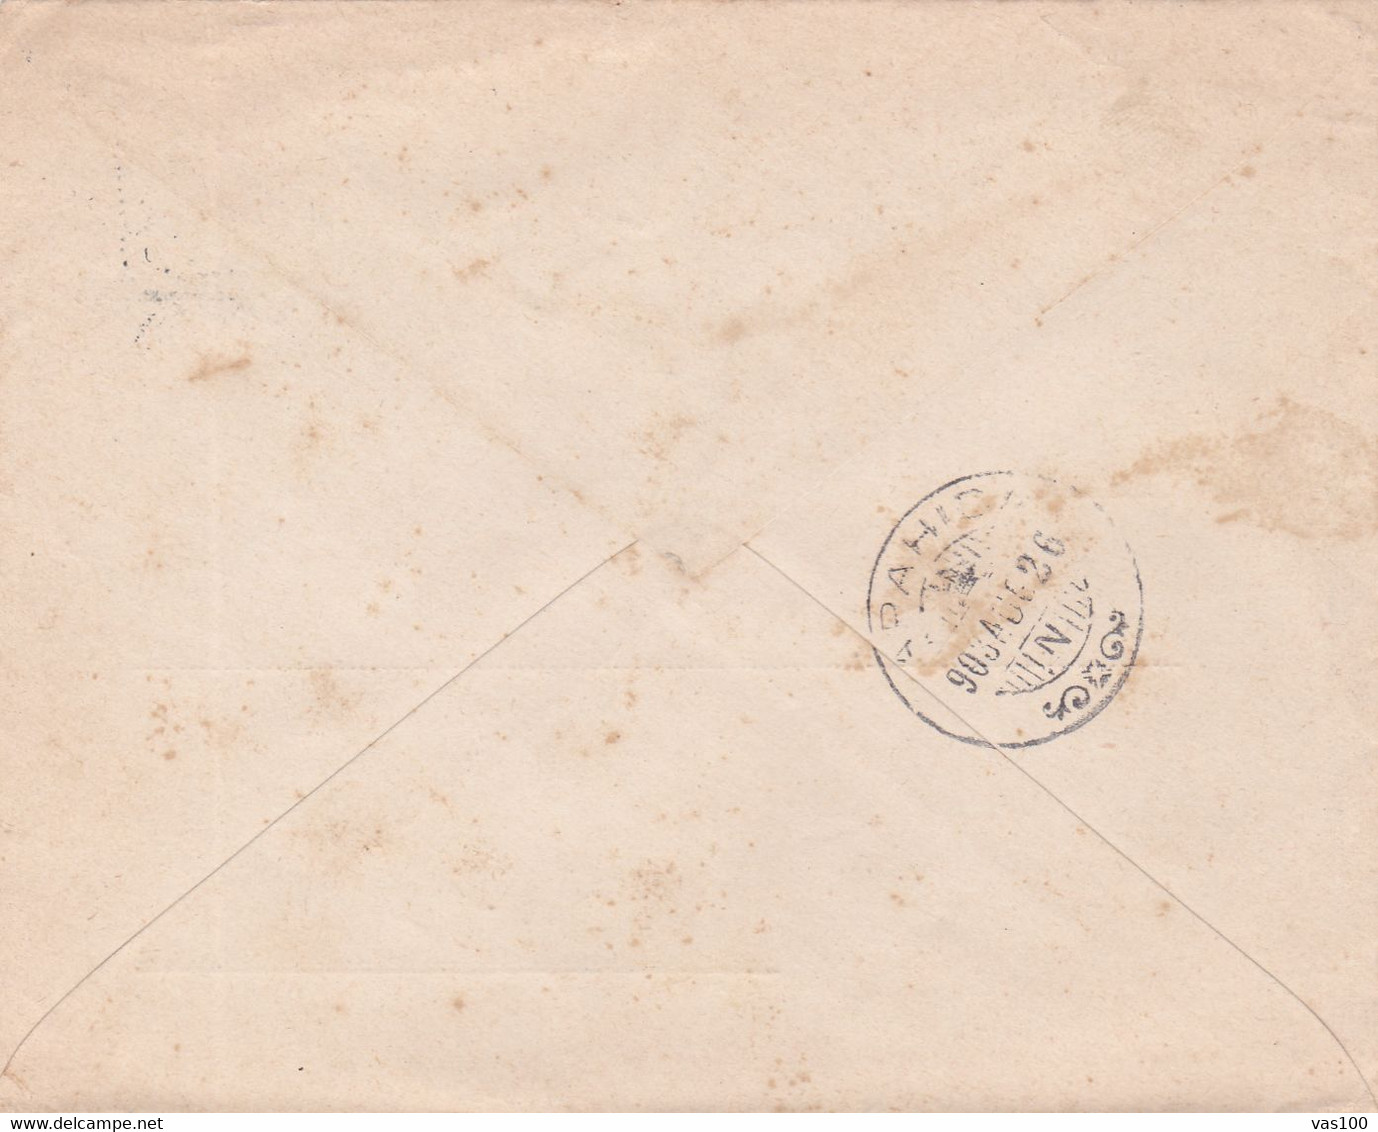 PERFINS PERFORE,HUNGARIA, COMMERCIAL PATENT SALGO TARJANI  "S T ", 1903 COVER TO APAHIDA ROMANIA. - Perfins